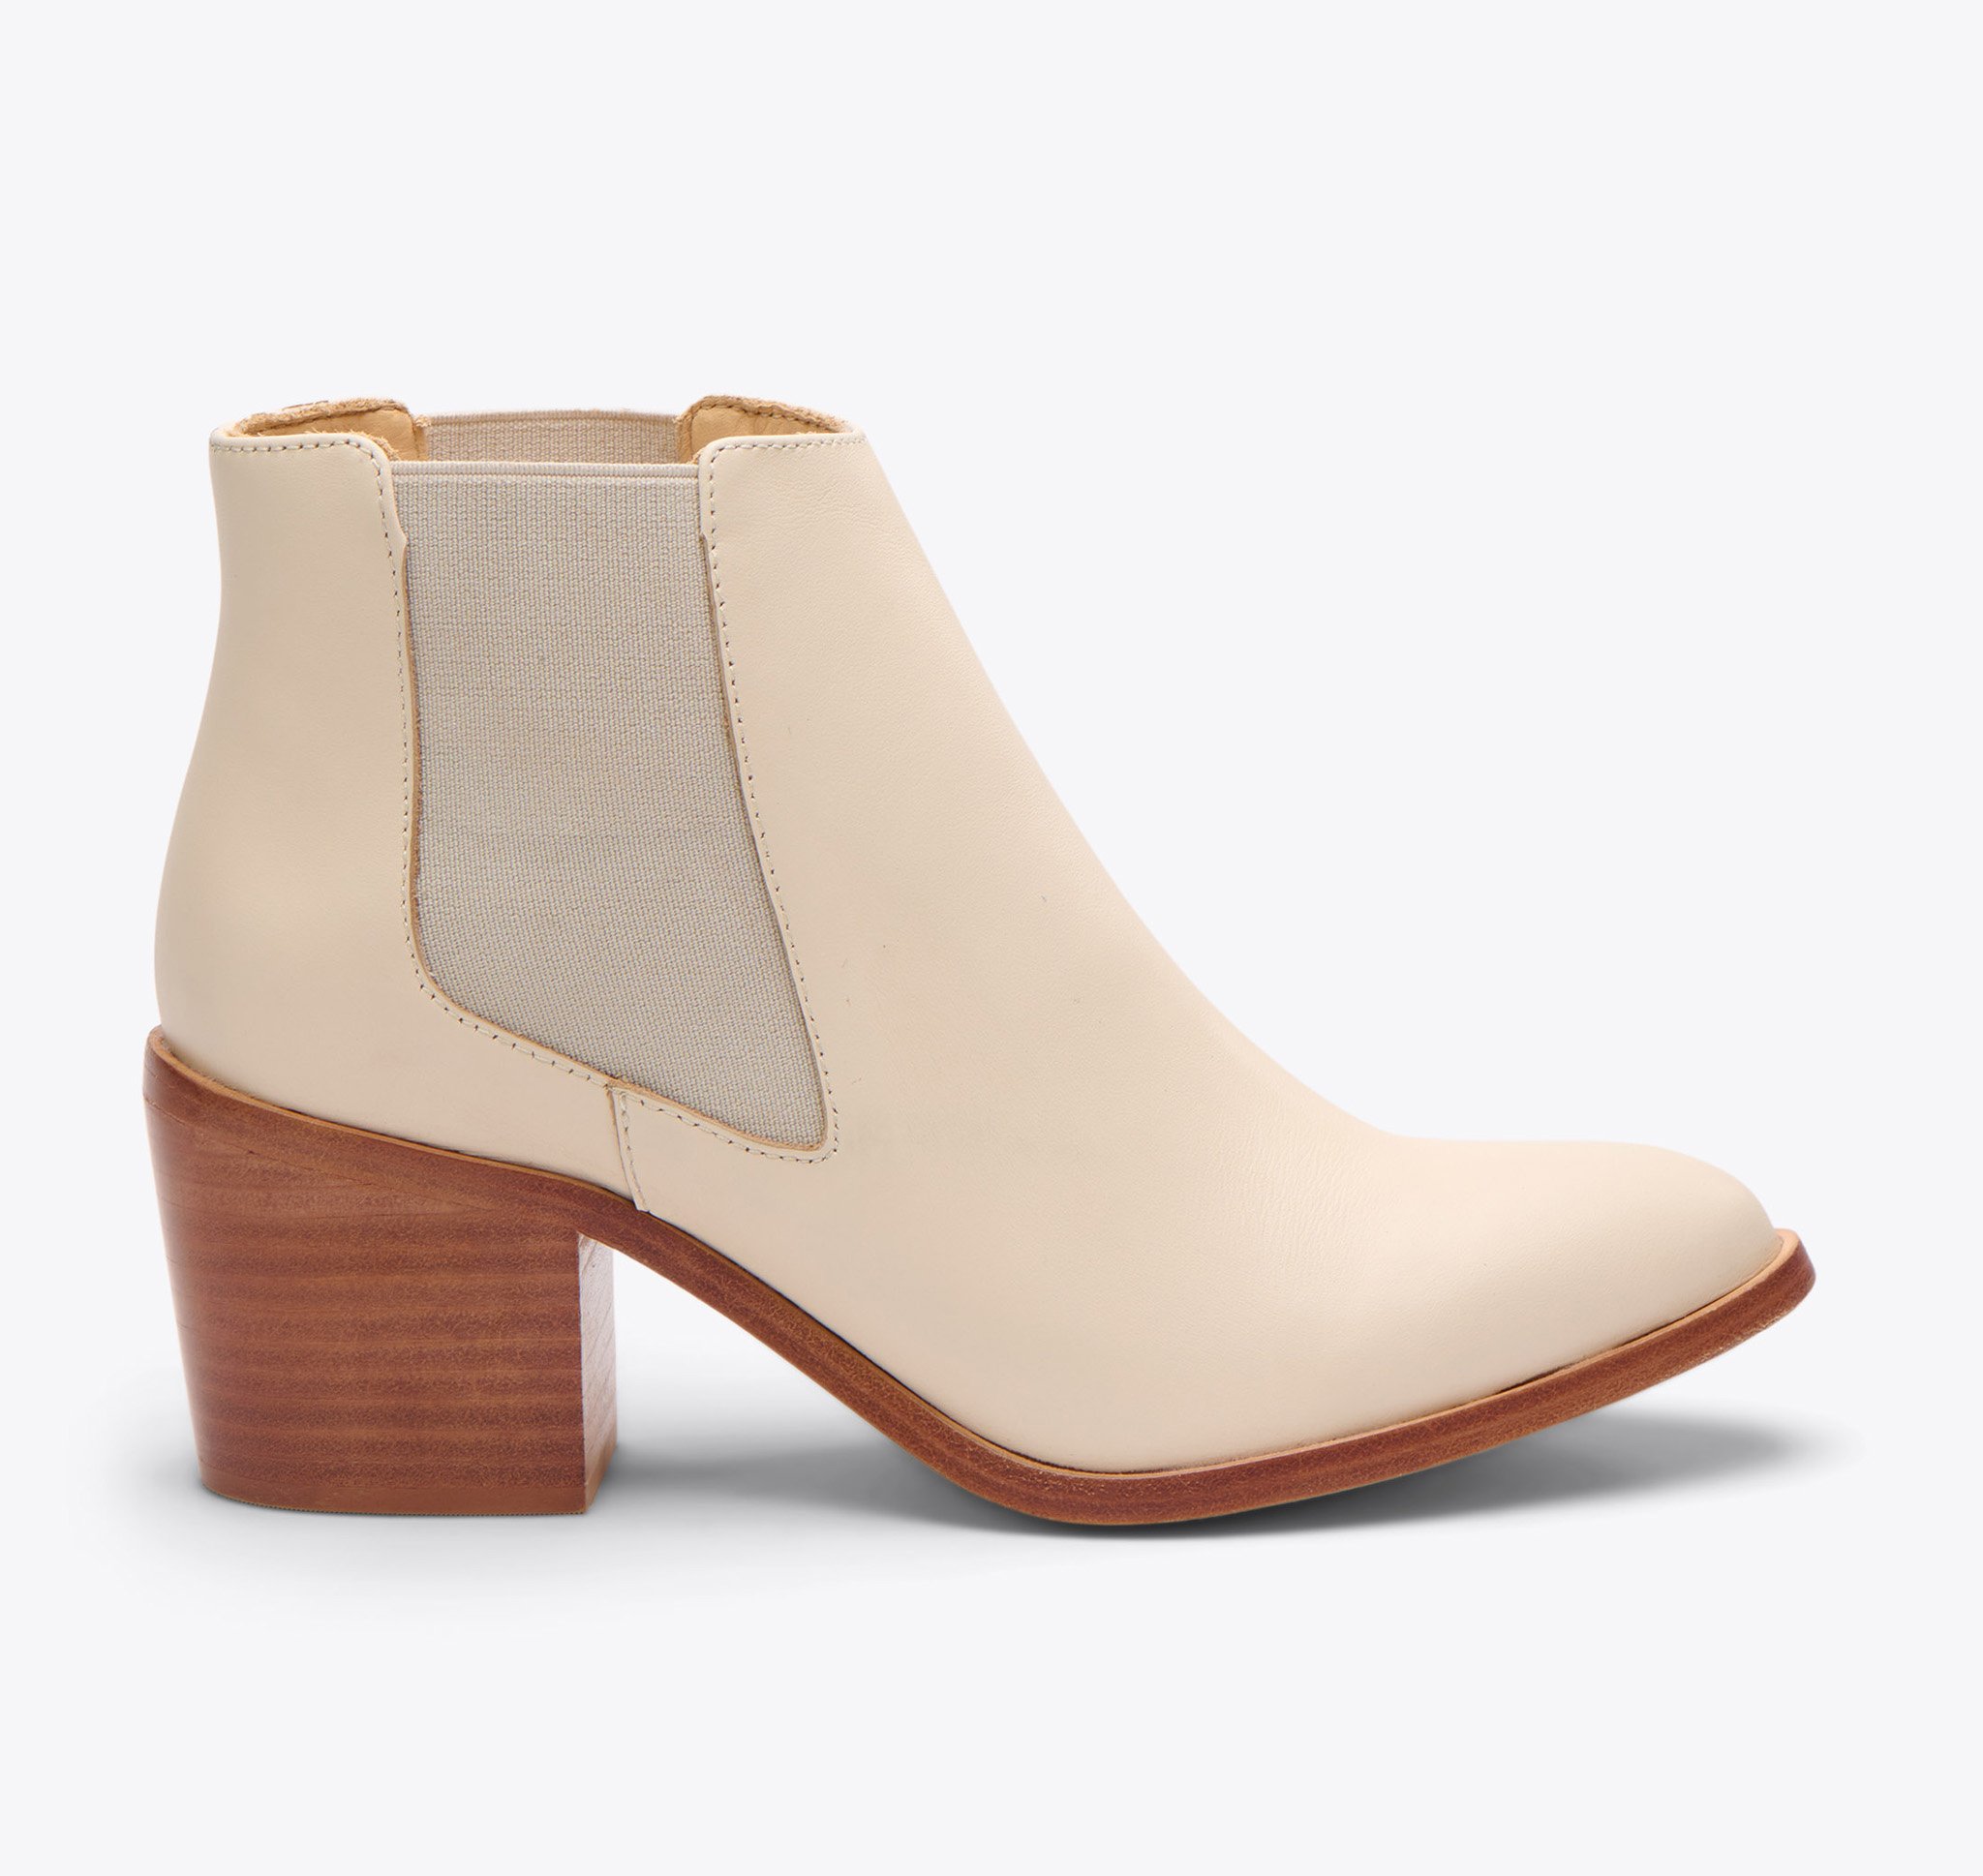 Nisolo Heeled Chelsea Boot Bone - Every Nisolo product is built on the foundation of comfort, function, and design. 